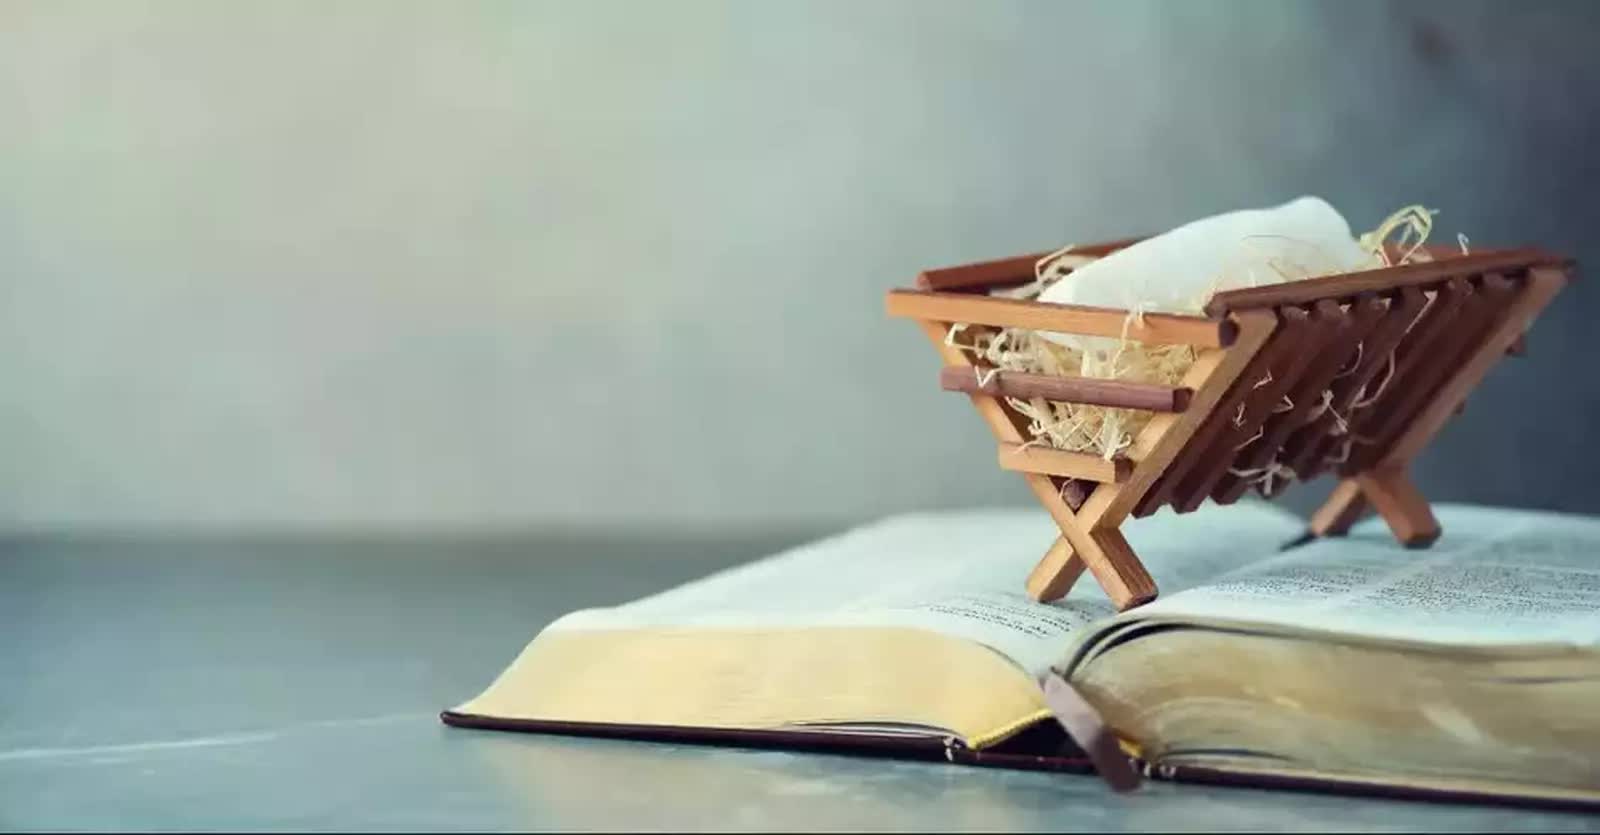 Manger on top of a Bible